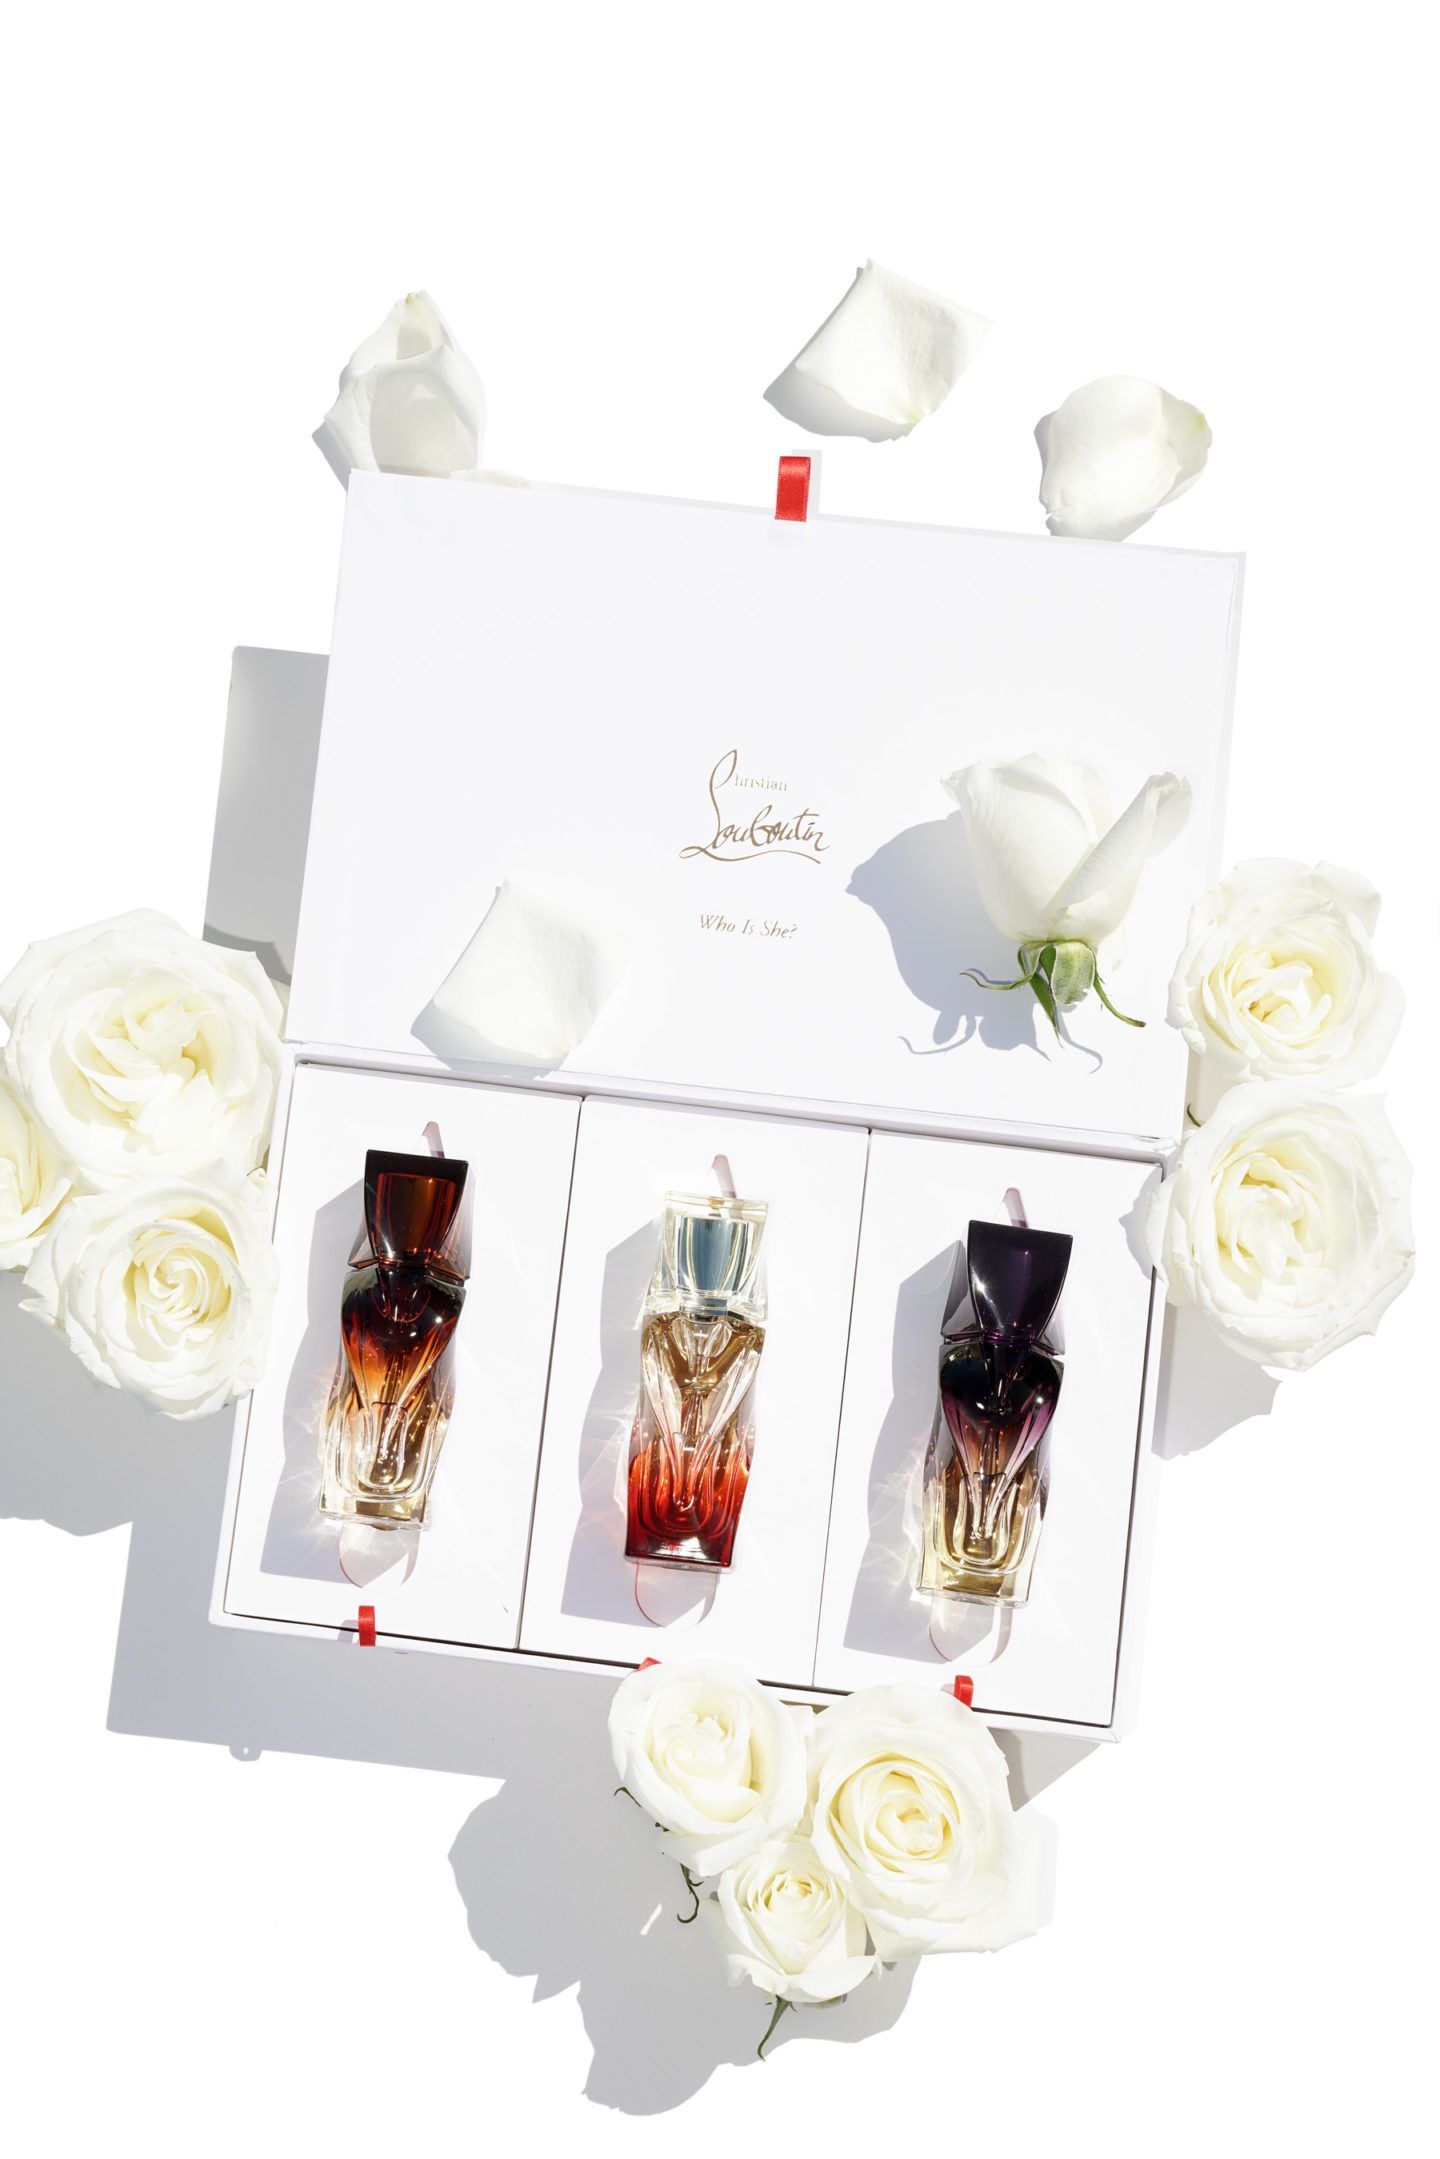 Louboutin Perfumes new 30 mL sizes | The Beauty Look Book